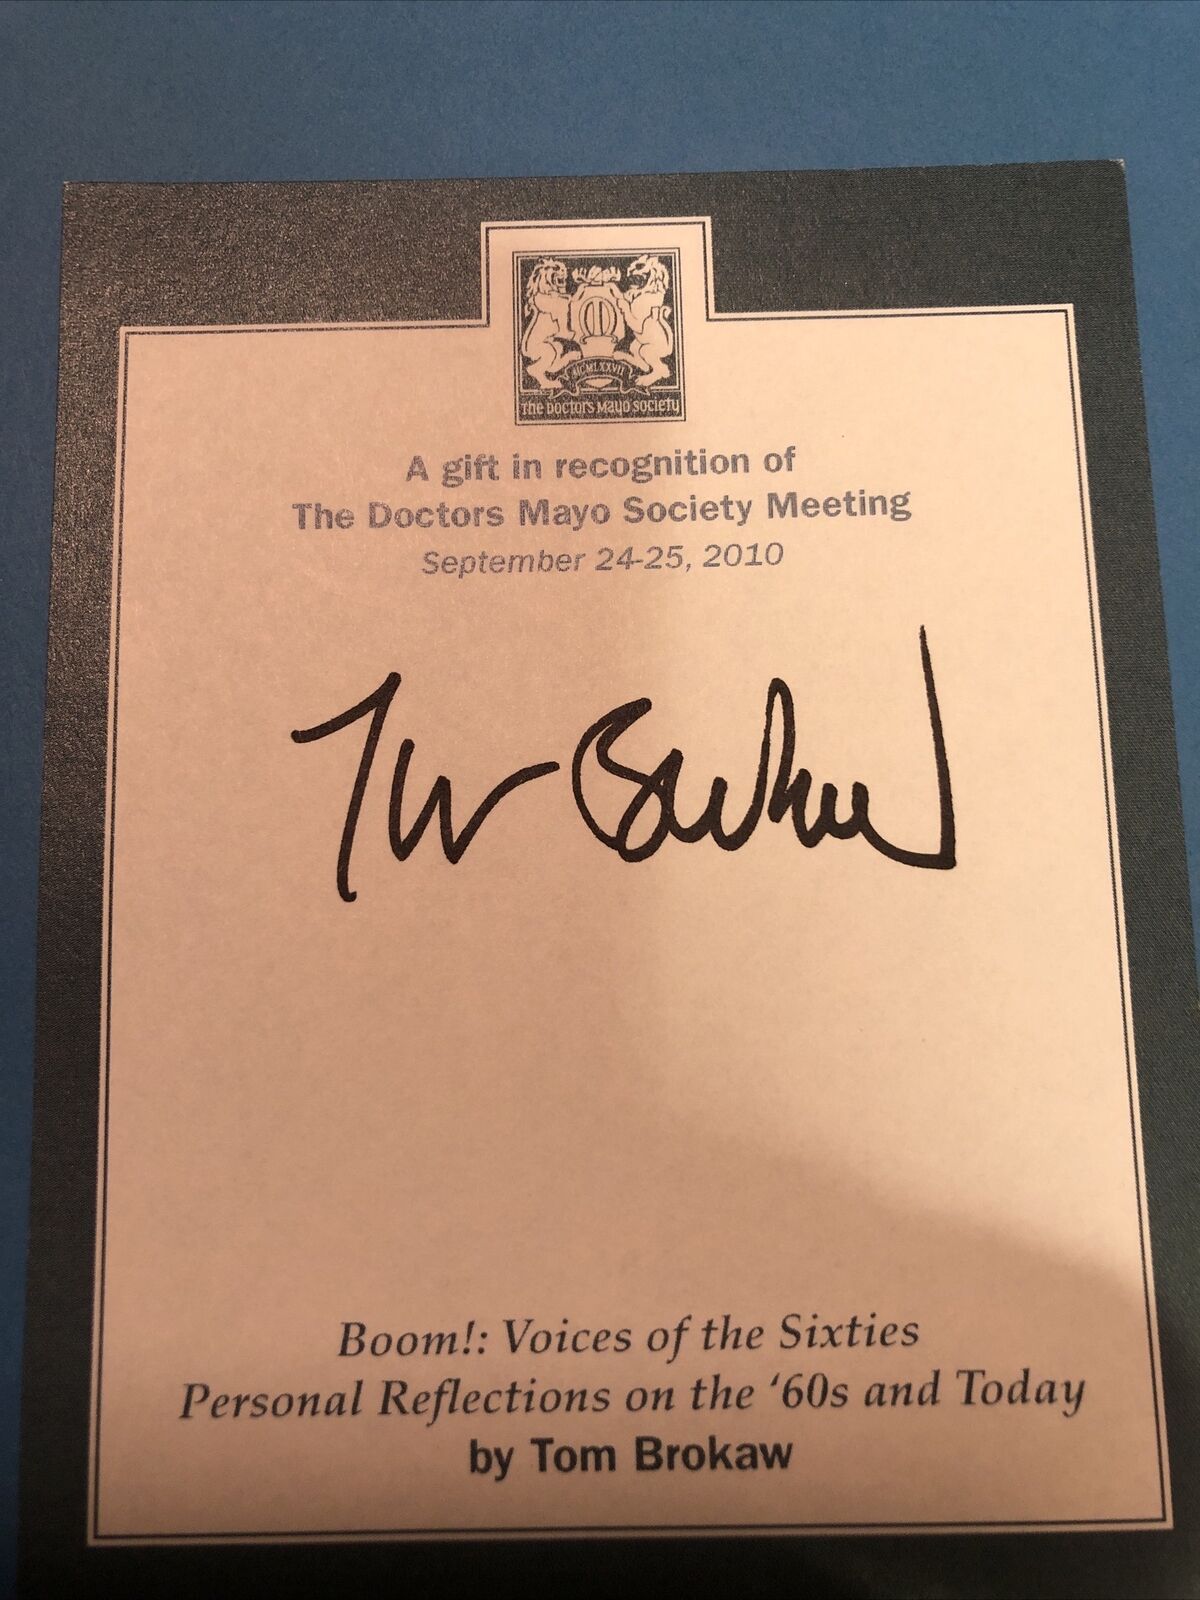 TOM BROKAW BOOM VOICES OF THE SIXTIES 2007 FIRST EDITION SIGNED Hard Cover